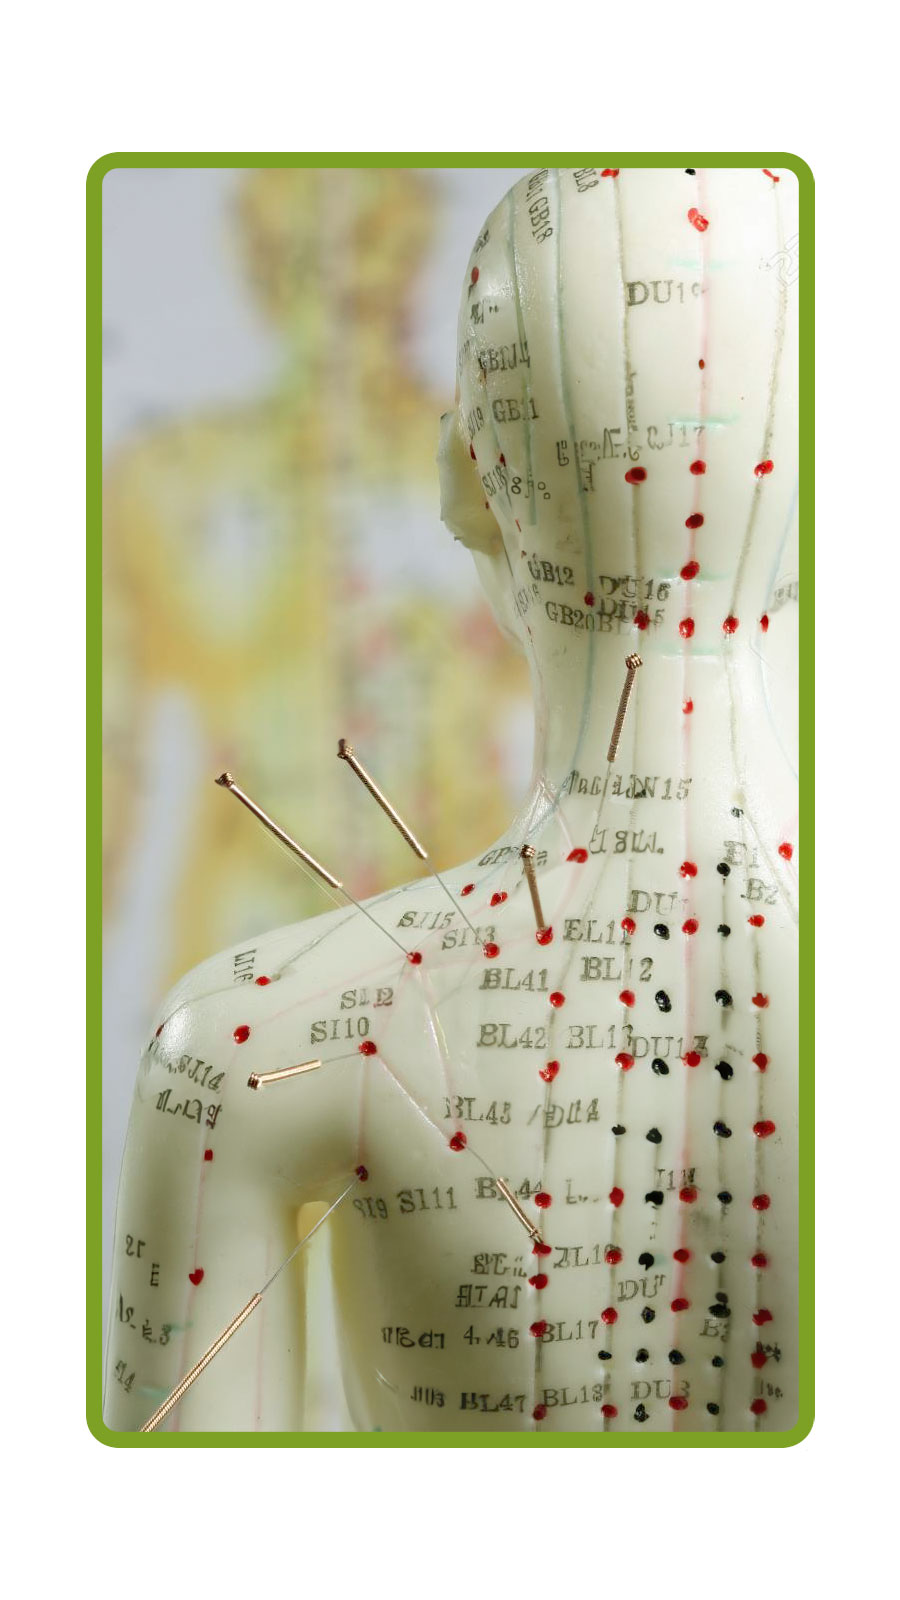 Acupuncture for the Athlete Image